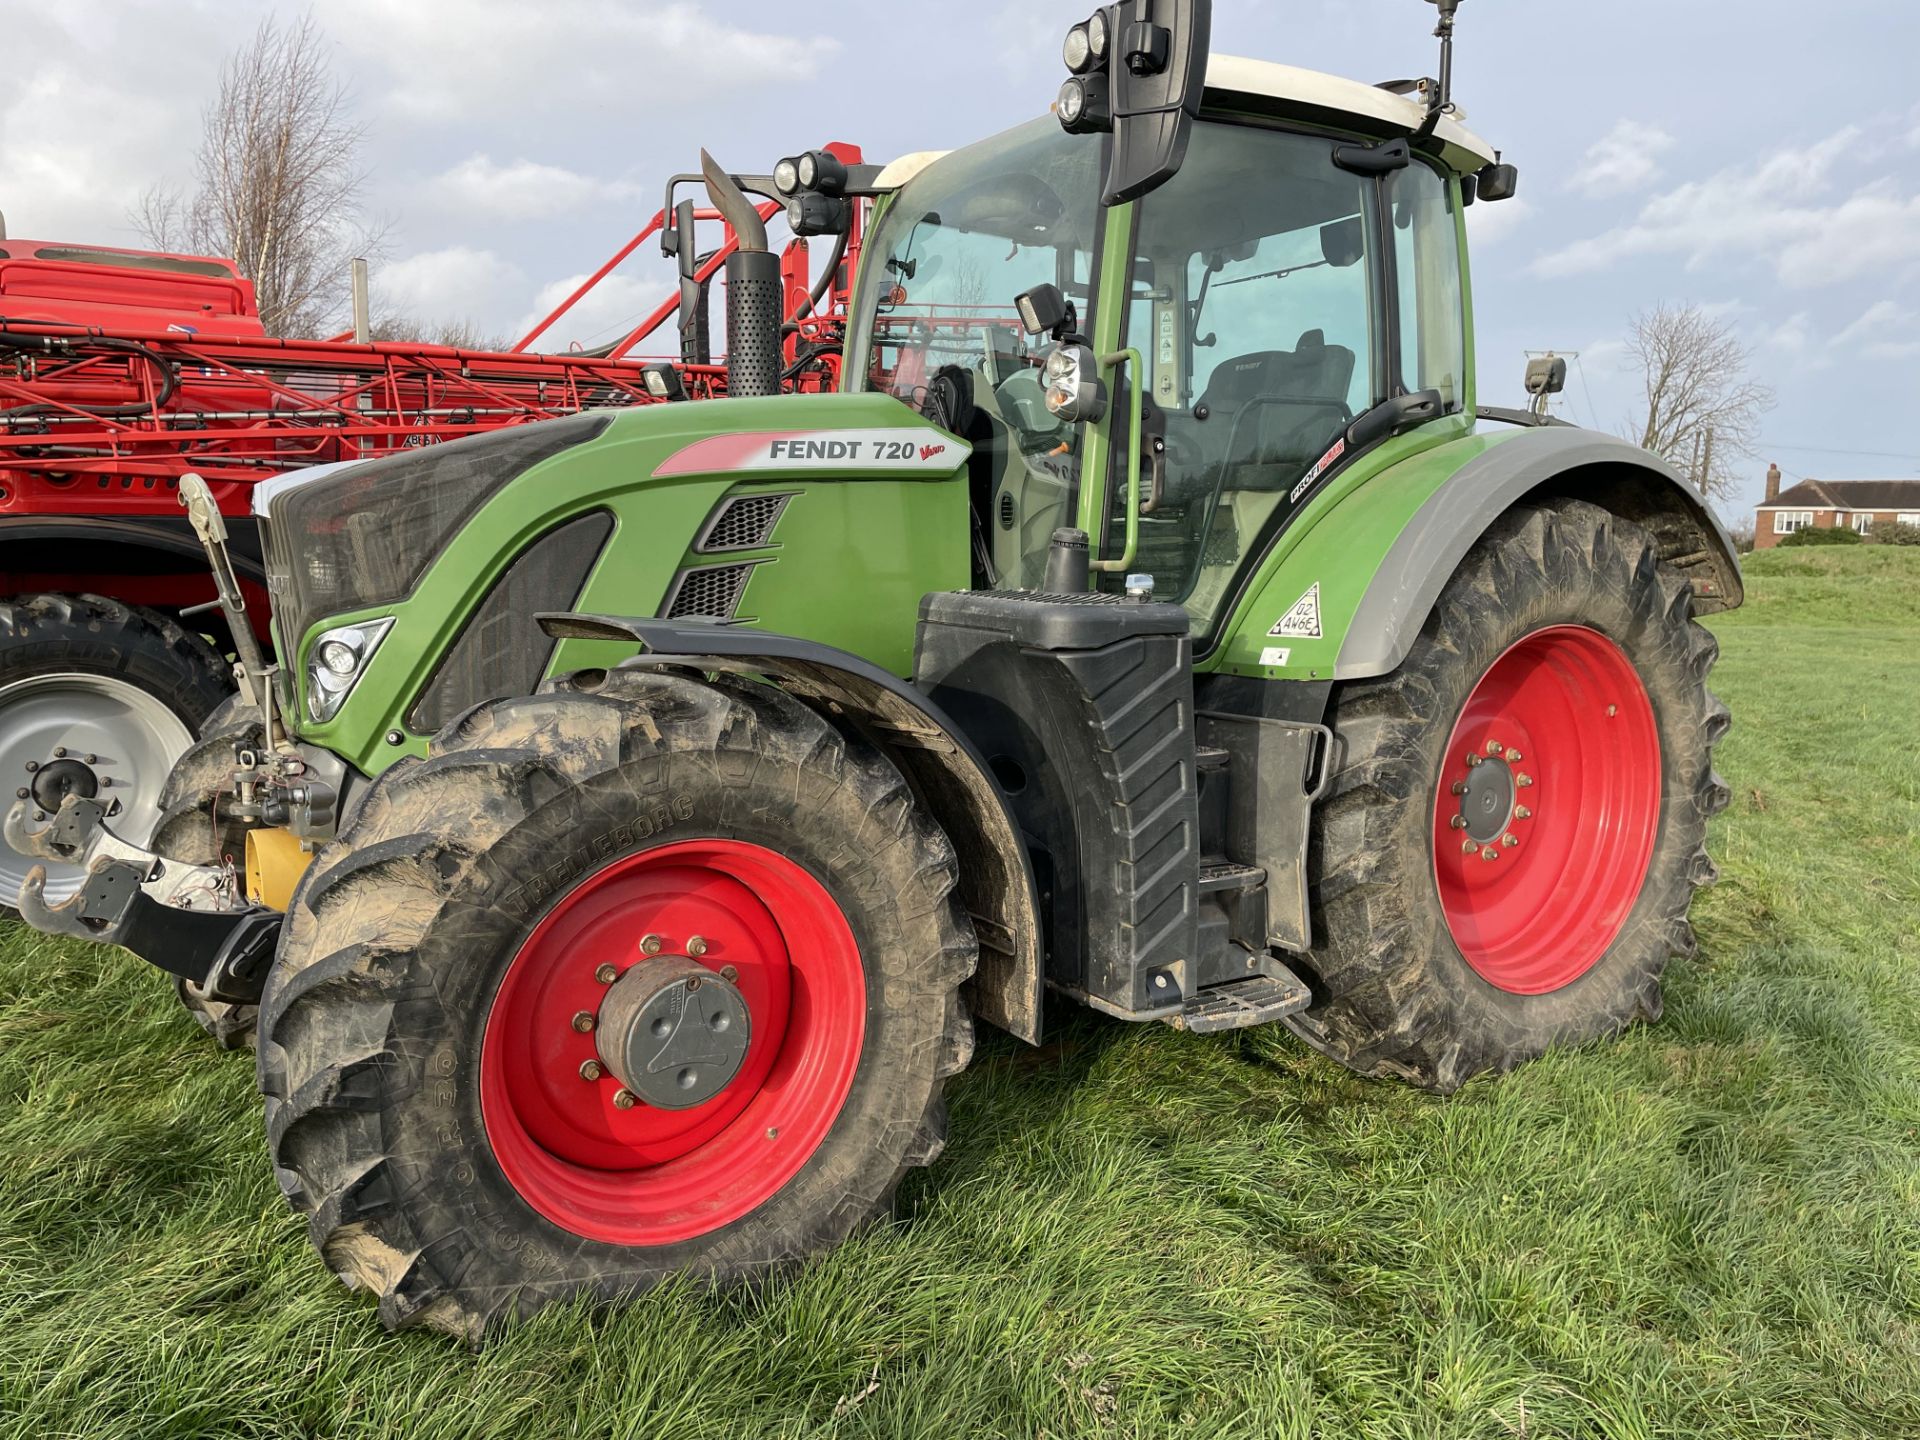 (18) Fendt 720 Vario S4 Profiplus 4wd tractor • Front linkage & PTO • Hydraulic return flow - Image 5 of 10